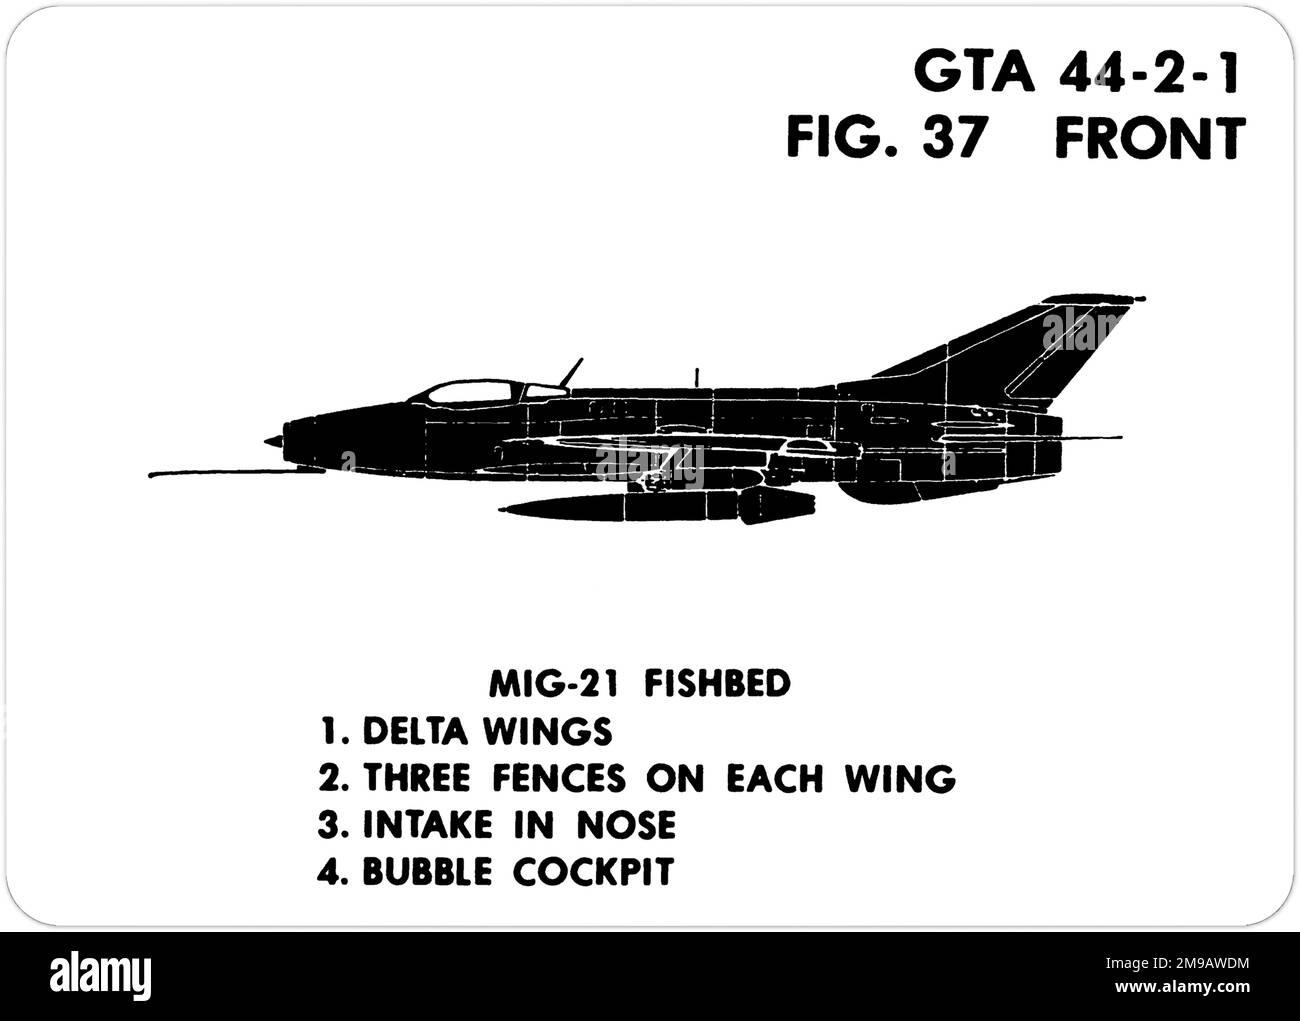 Mikoyan-Guryevich MiG-21F (NATO codename: Fishbed). This is one of the series of Graphics Training Aids (GTA) used by the United States Army to train their personnel to recognize friendly and hostile aircraft. This particular set, GTA 44-2-1, was issued in July1977. The set features aircraft from: Canada, Italy, United Kingdom, United States, and the USSR. Stock Photo